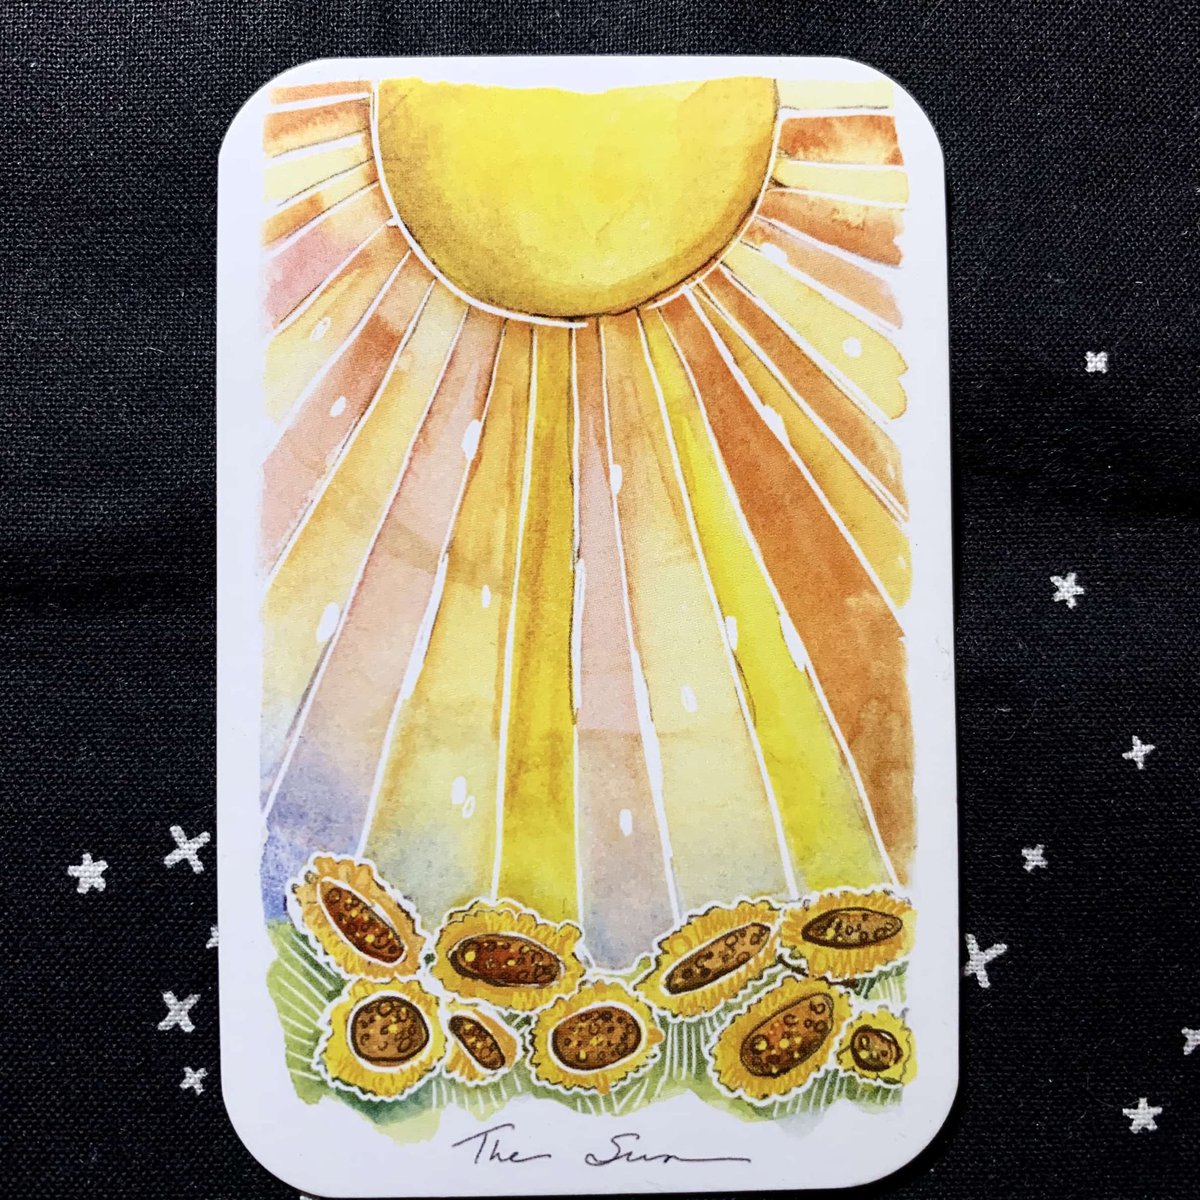 Card of the Day: The Sun
Feel the warmth of the Sun on your back as you reap the results of your hard work. Its light will shine through any darkness. Enjoy the well-deserved abundance!
#tarotbygraham #tarot #oraclereading #rootsandwingsoracledeck #cardoftheday #oraclecards